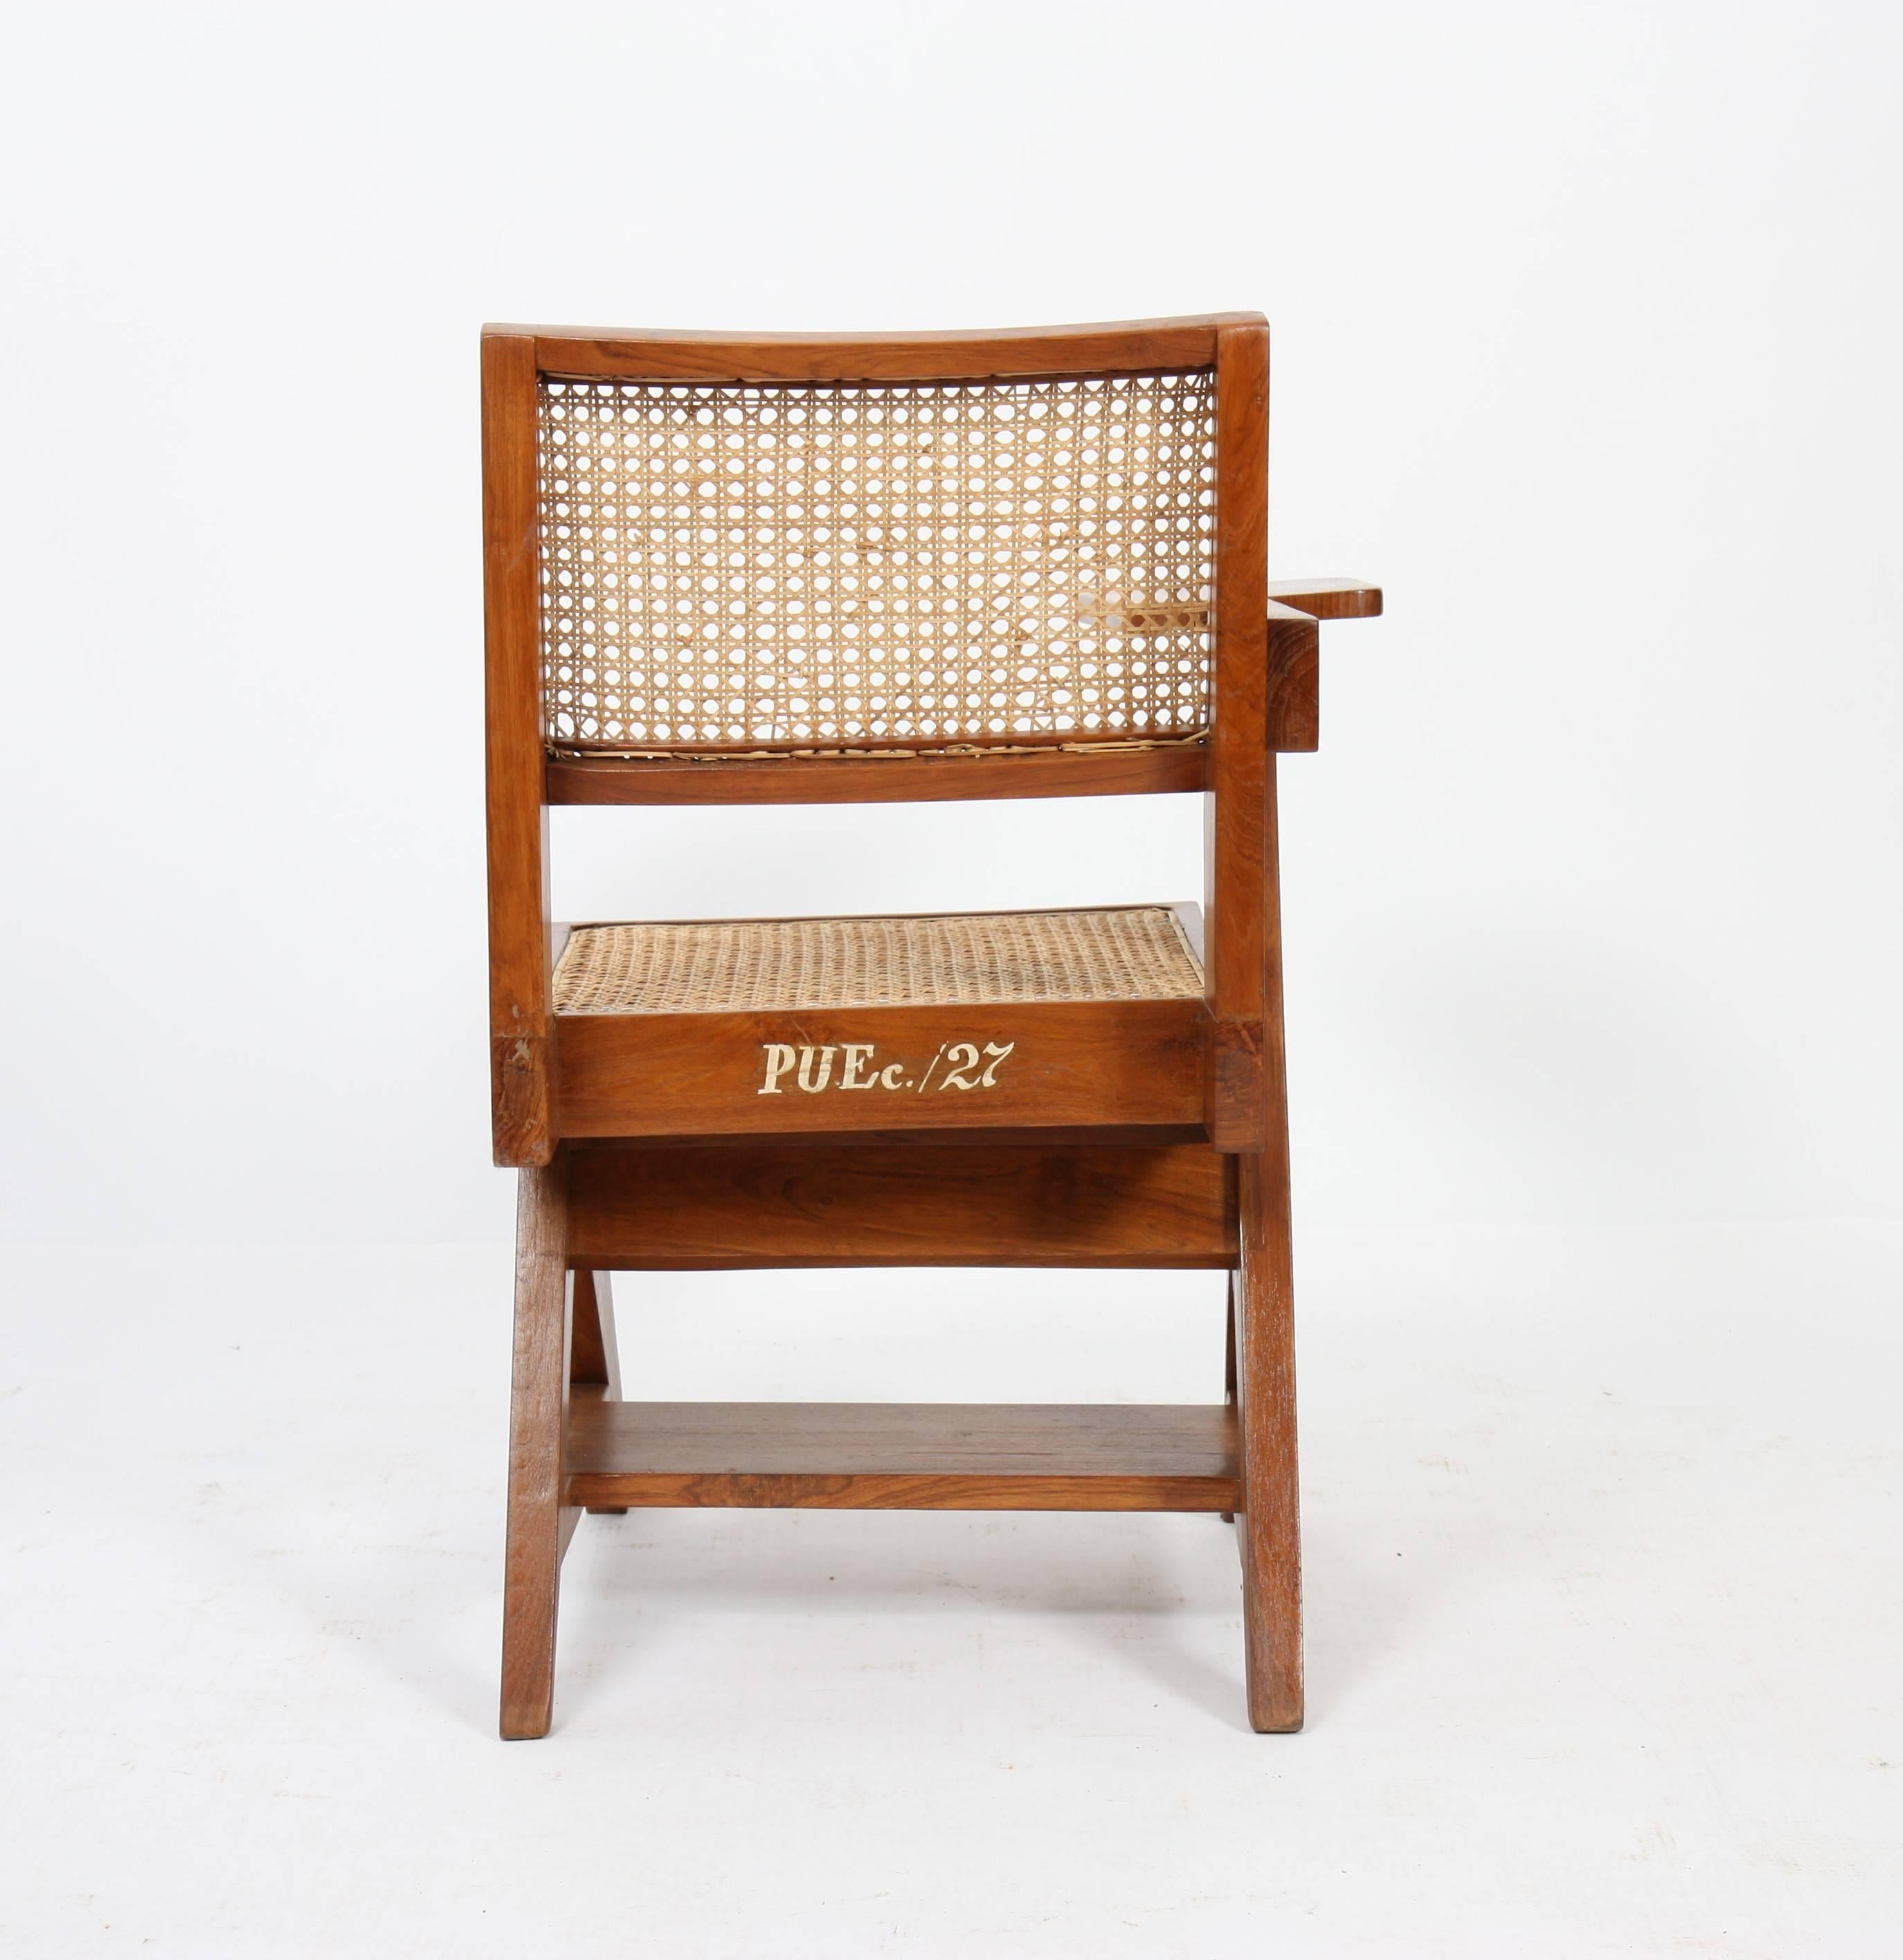 Pierre Jeanneret (1896-1967).
Desk chair in solid teak, flat sloping back and 